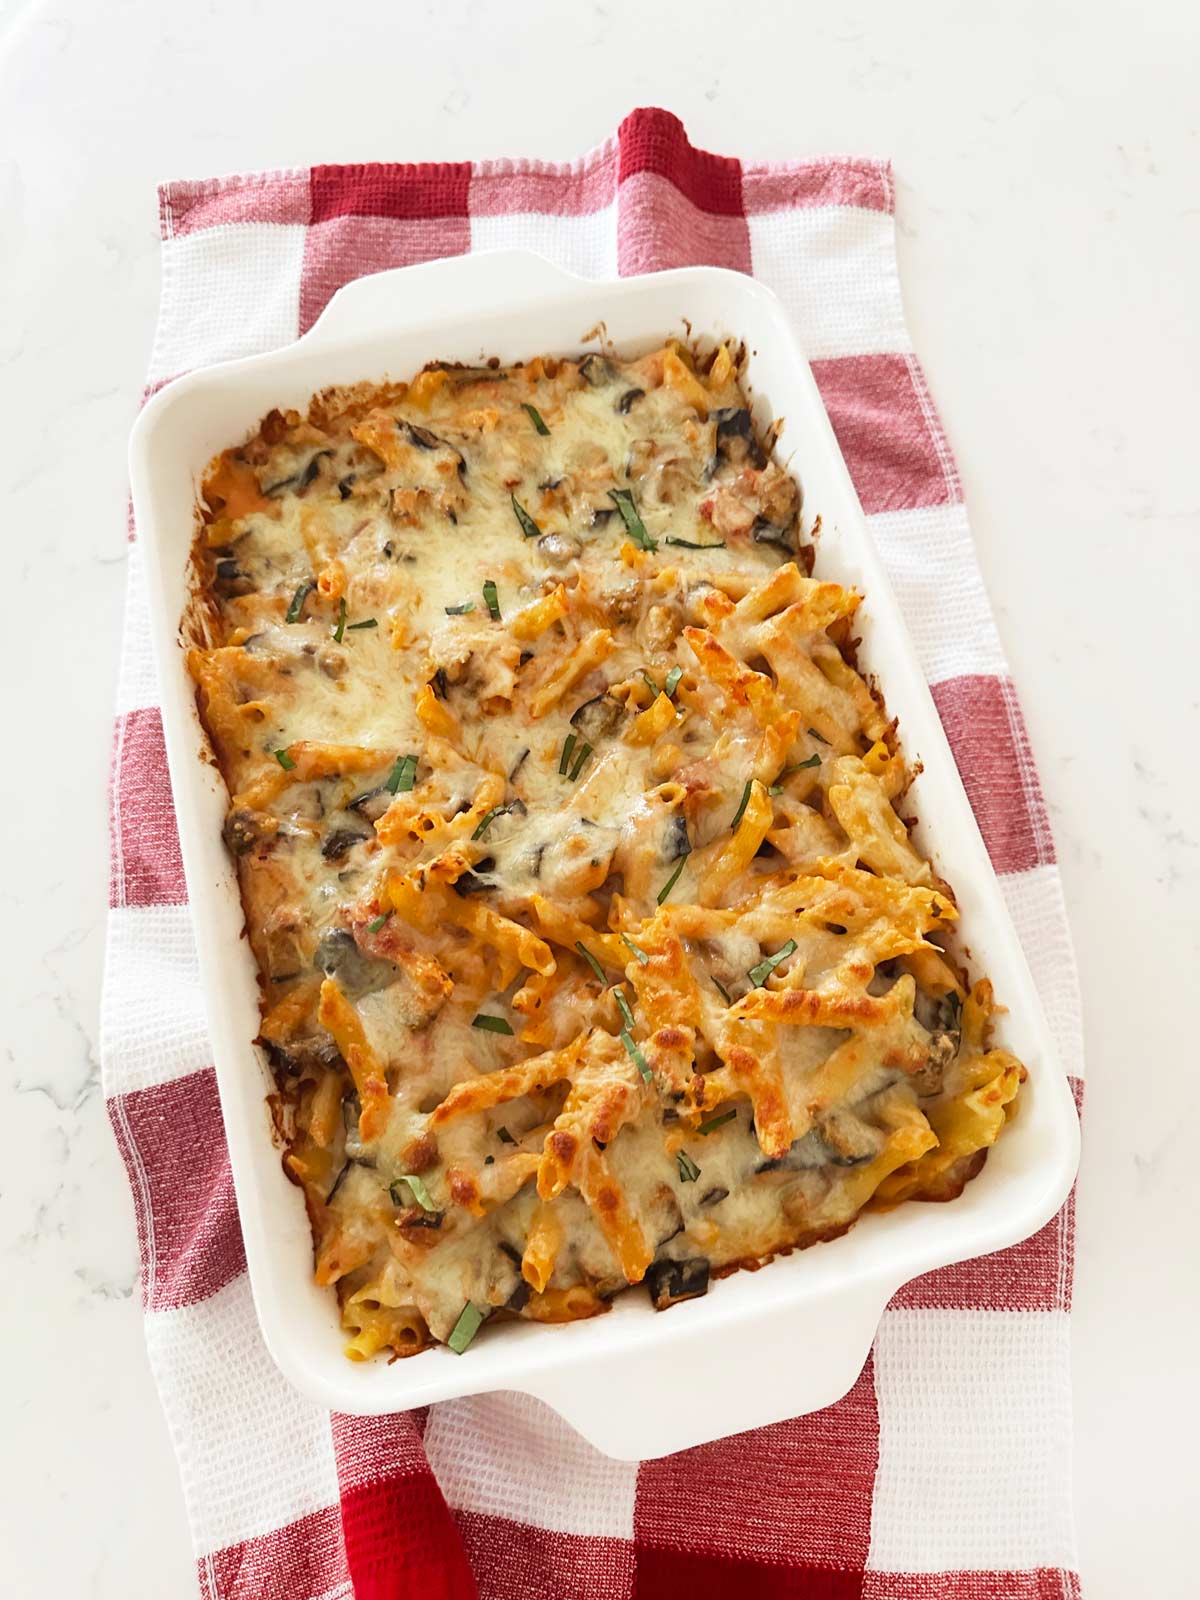 Baked Penne with eggplant in a casserole dish on a red and white kitchen towel on a white kitchen countertop.